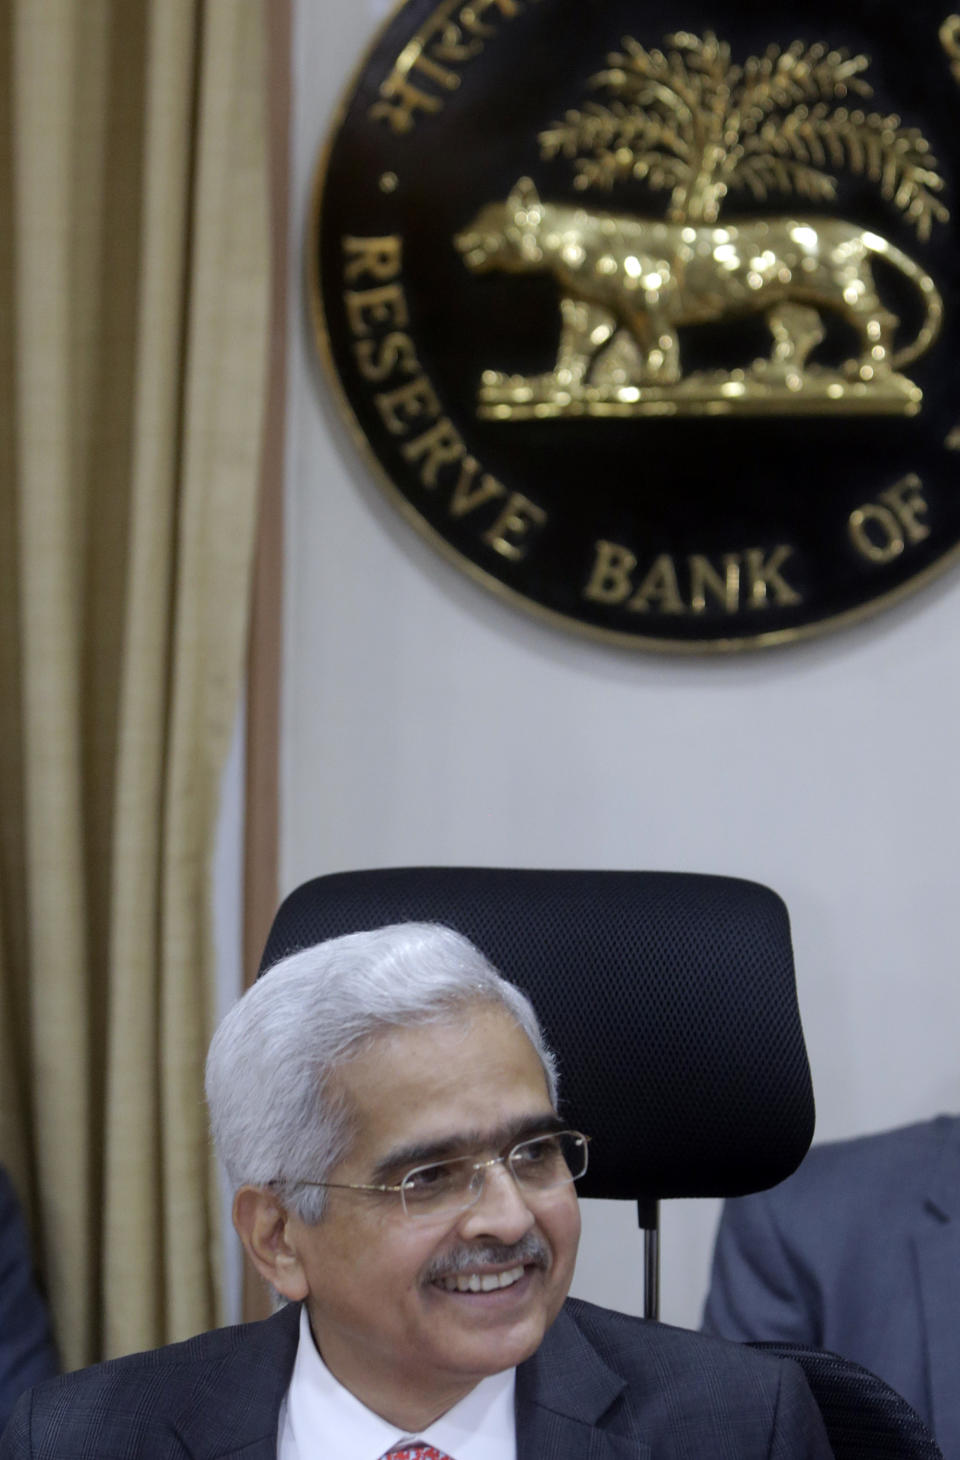 Reserve Bank of India Governor Shaktikanta Das addresses a press conference in Mumbai, India, Thursday, June 6, 2019. India's central bank has cut its key interest rate by a quarter of a percentage point to 5.75% from 6% with immediate effect to fortify the economy as consumer spending and corporate investment falter. (AP Photo/Rajanish Kakade)